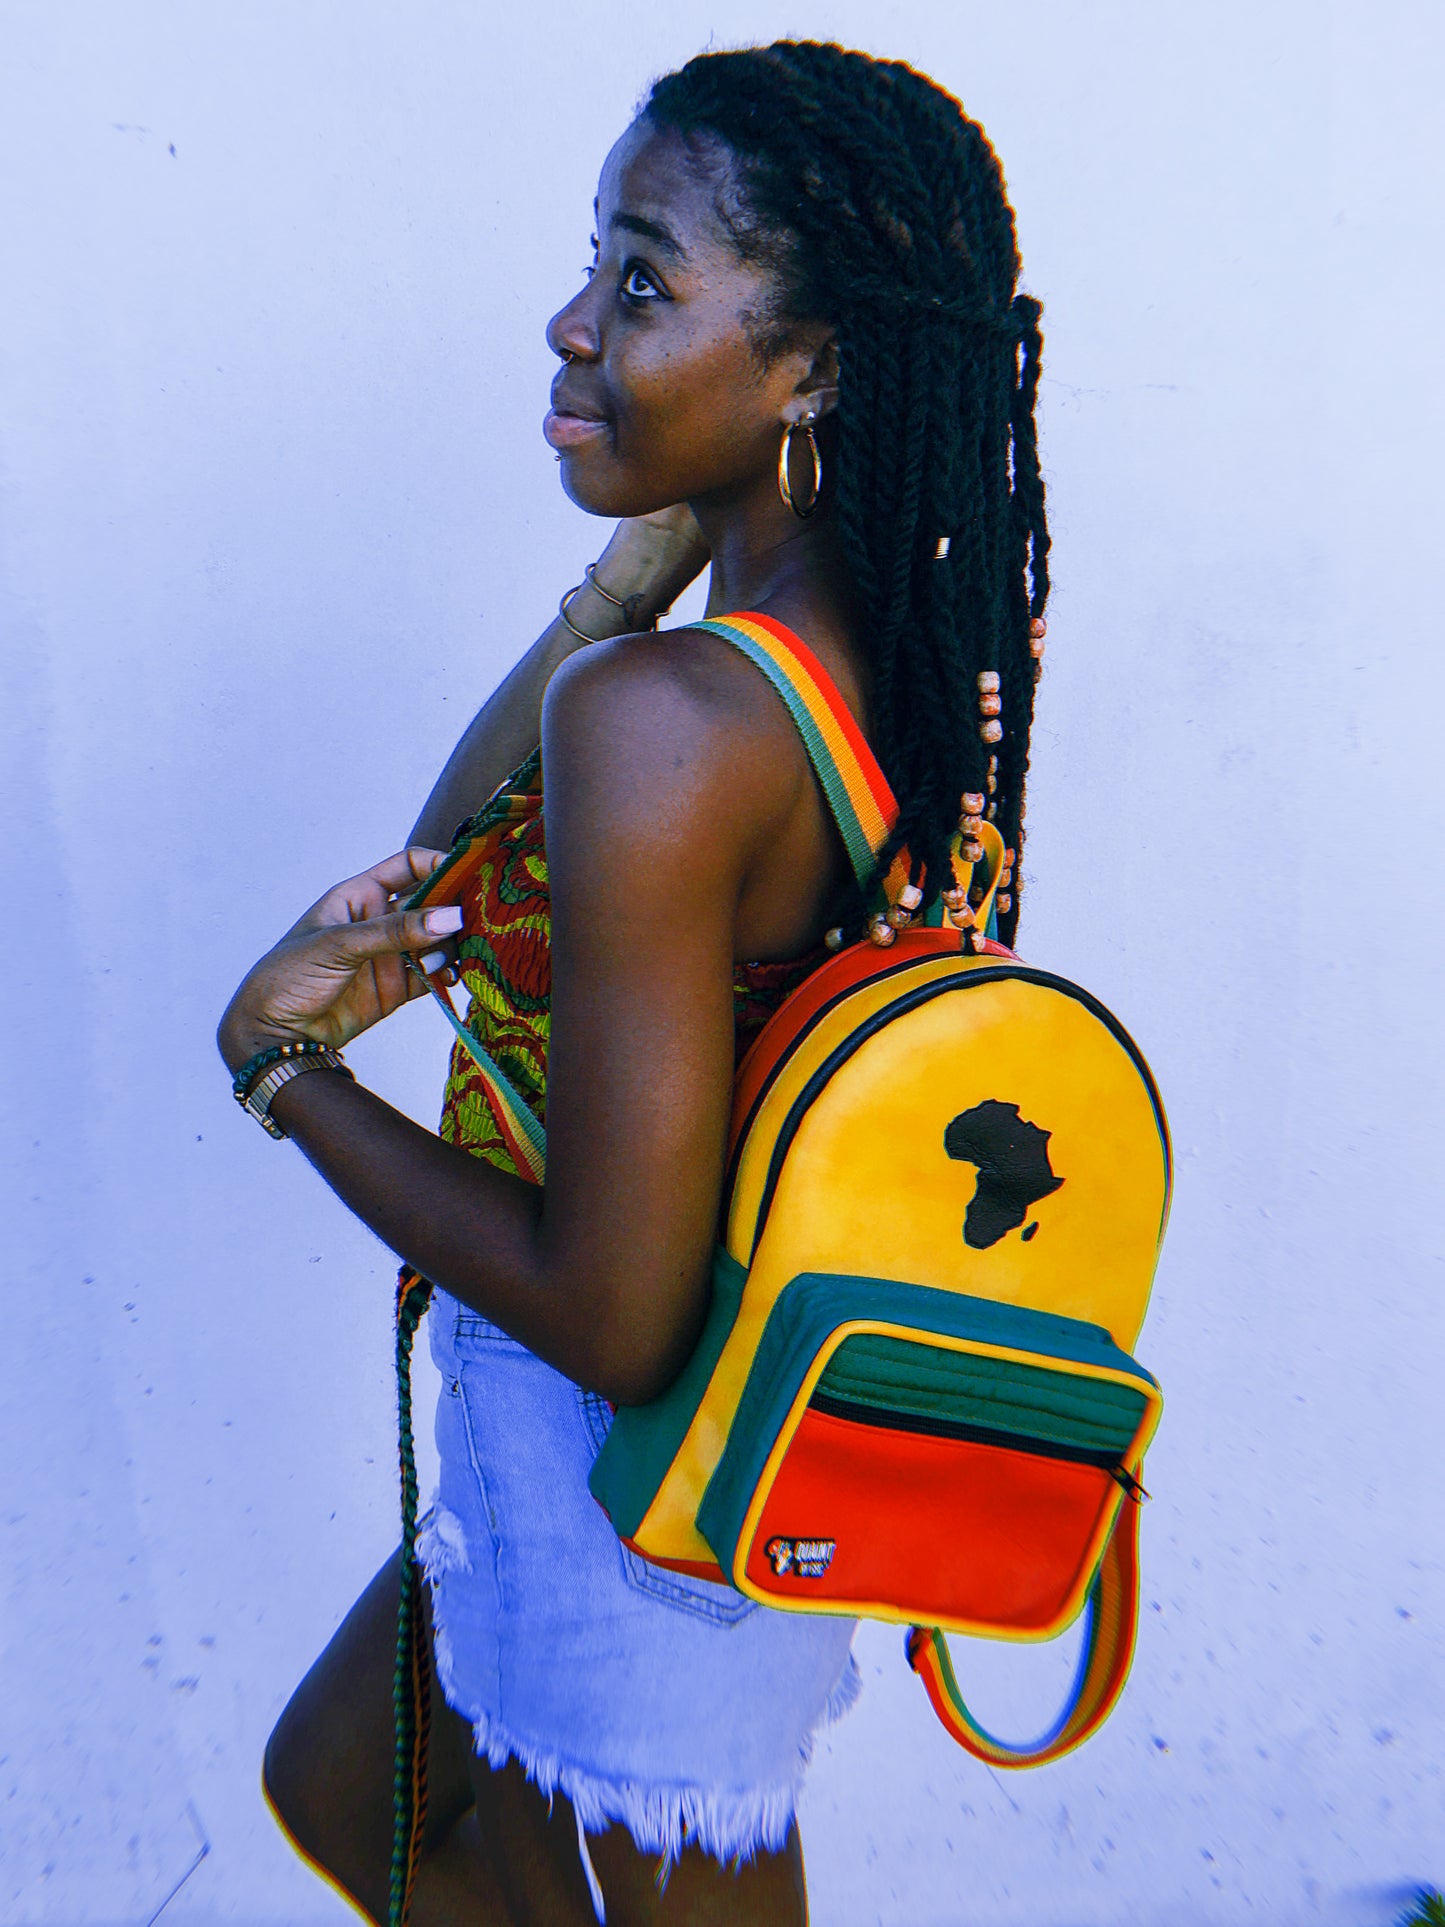 Ras'Pack - yellow backpack with red and green front pocket and a mapt of Africa.